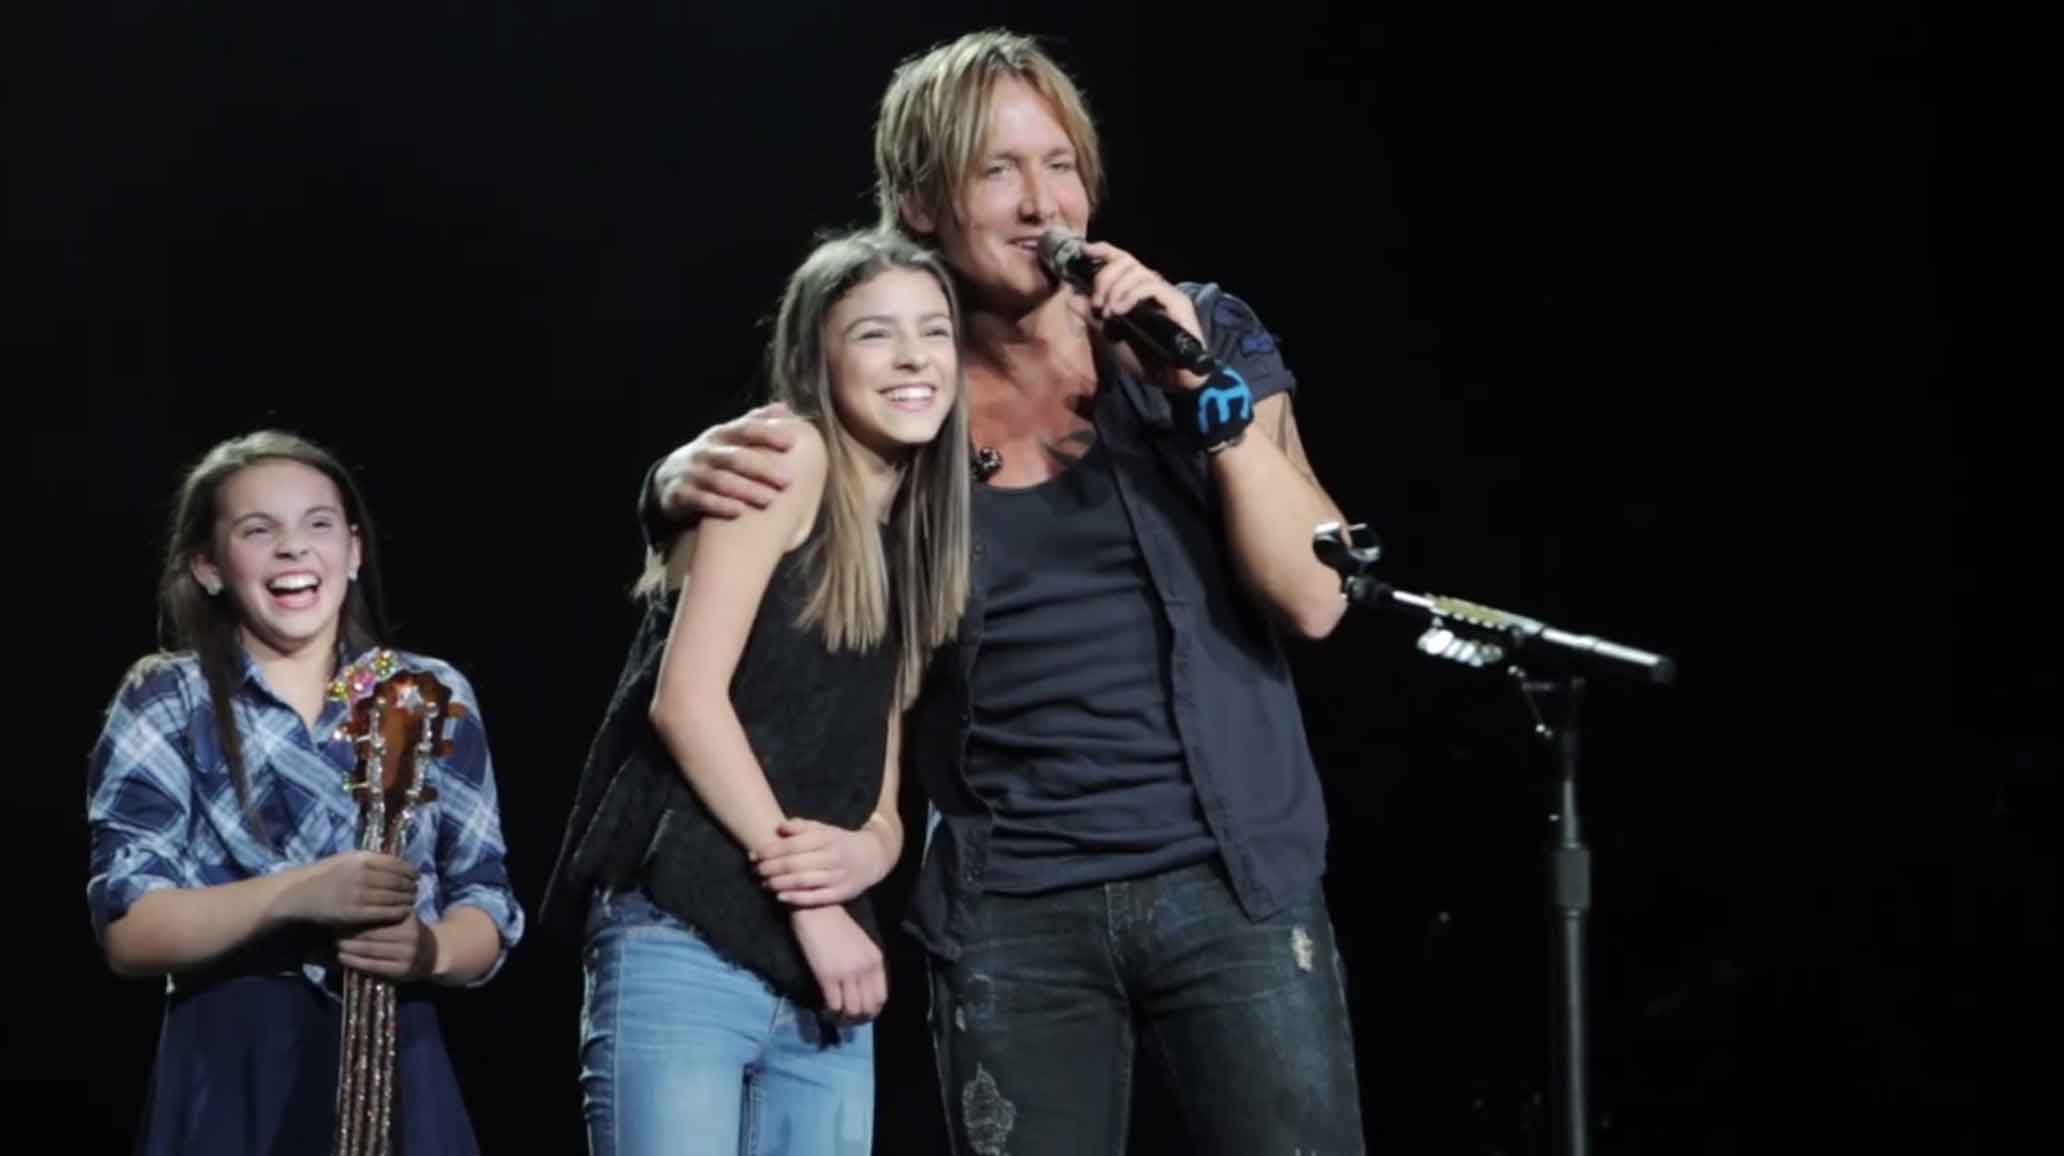 Keith Urban has his arm around 14 year old Hailey who is smiling as he talks into the mic on stage.